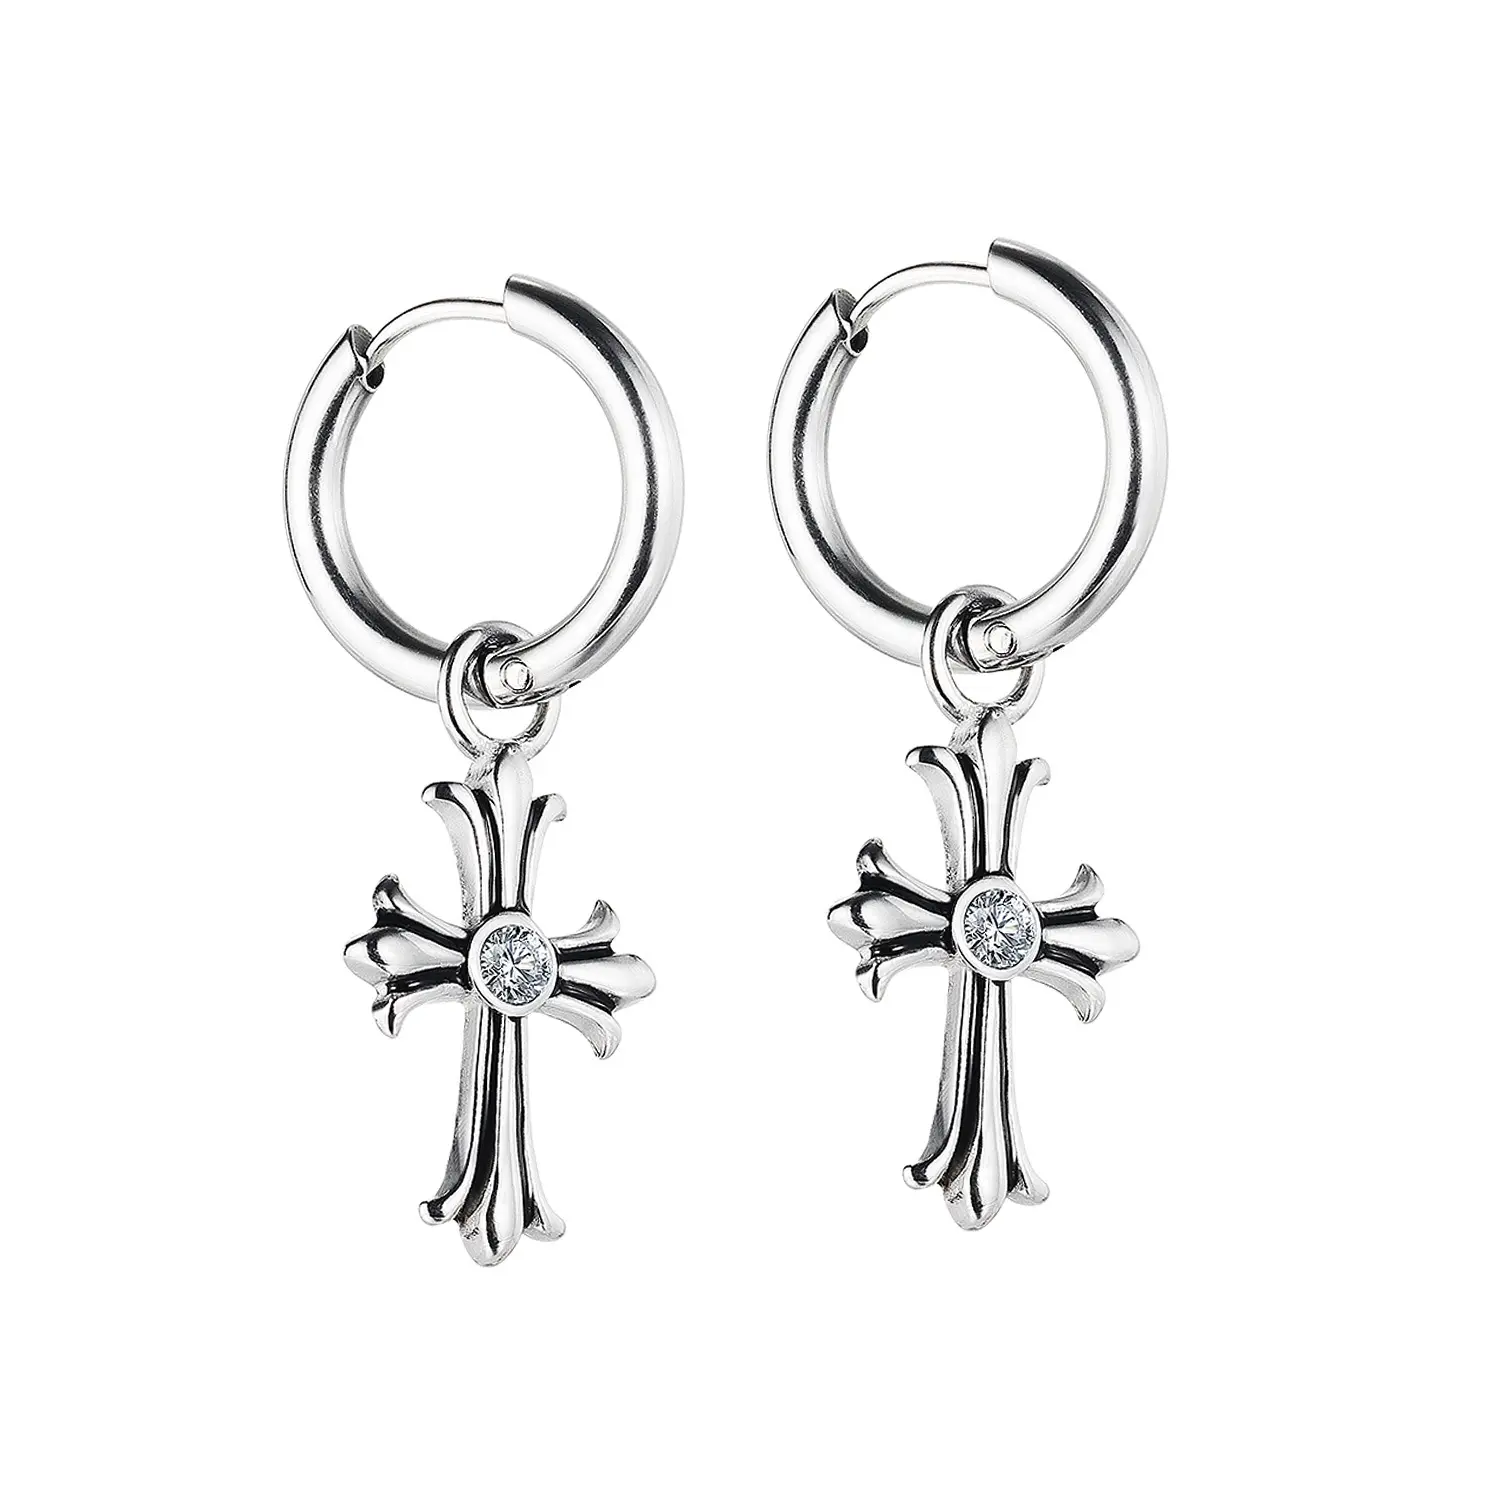 New Stainless Steel Jewelry Manufacturer Wholesale Earrings In The Shape Of A Cross Boys And Girls 18k Gold Plated Hoop Earrings